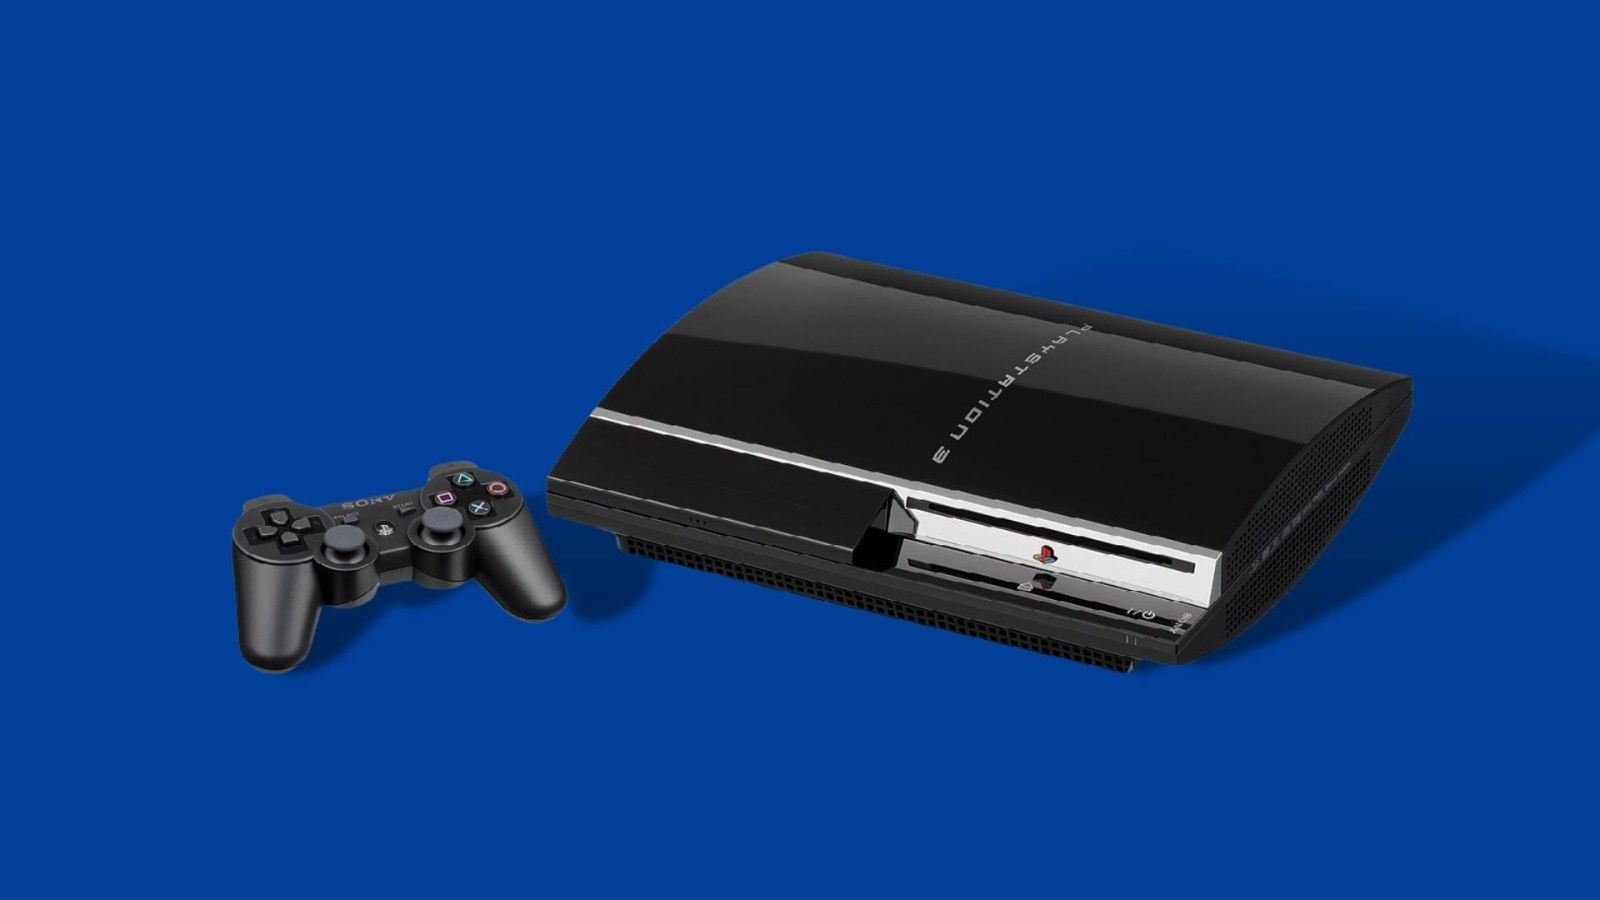 PlayStation Now support is ending for PS3 and many more devices